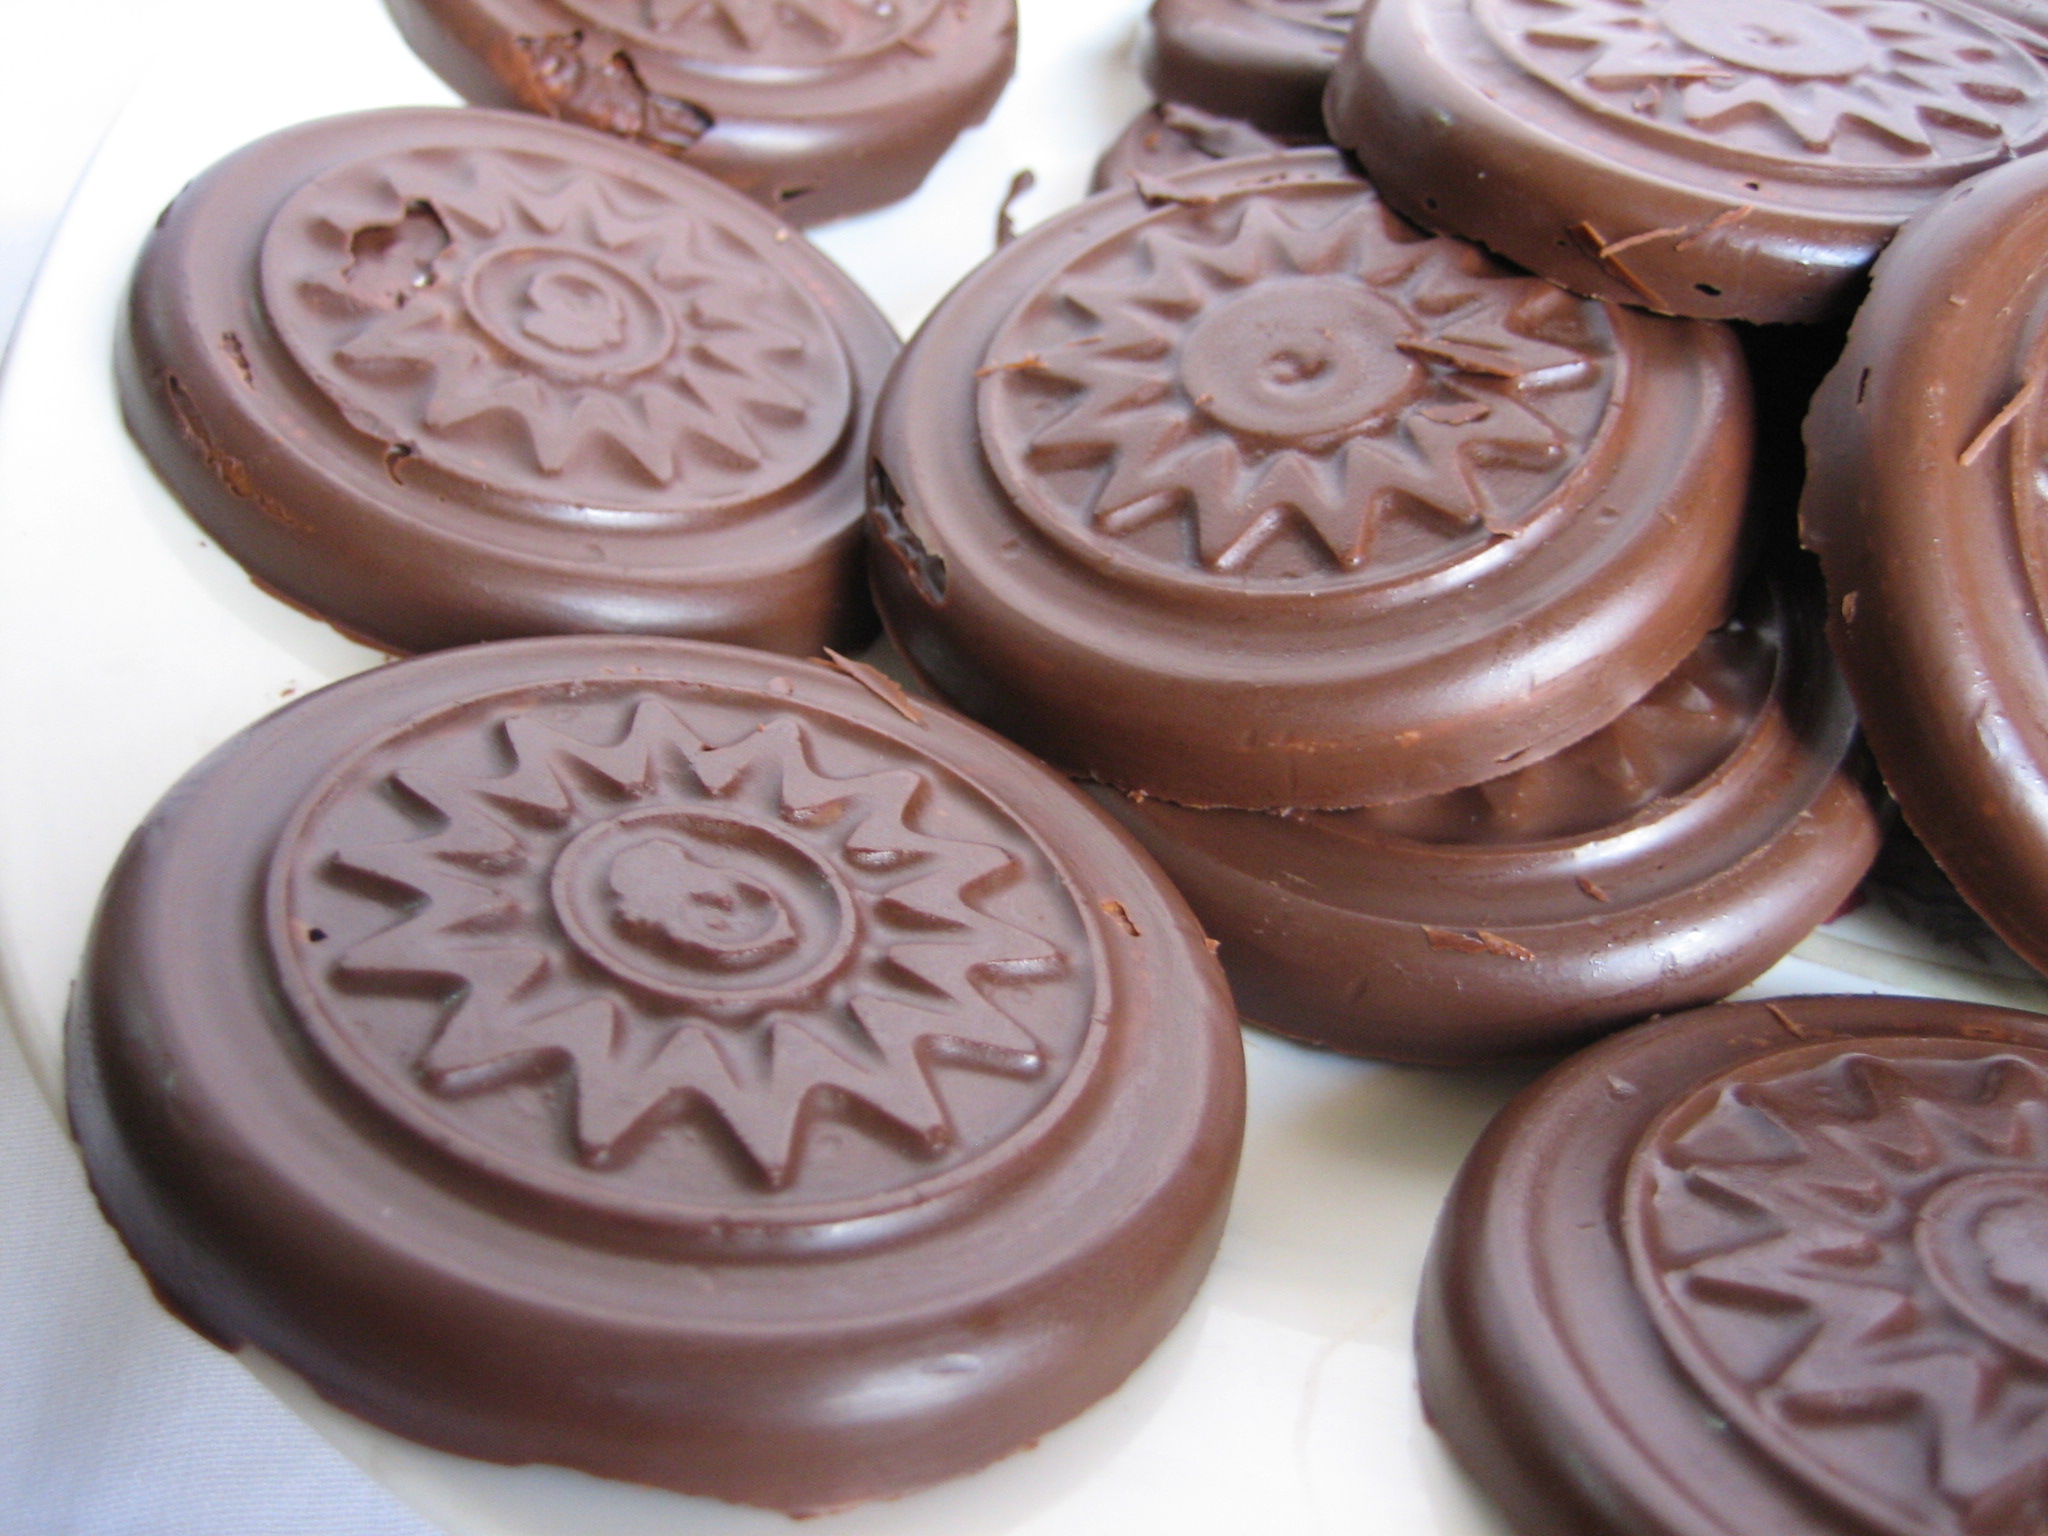 Facts about Dark Chocolates You Didn’t Know